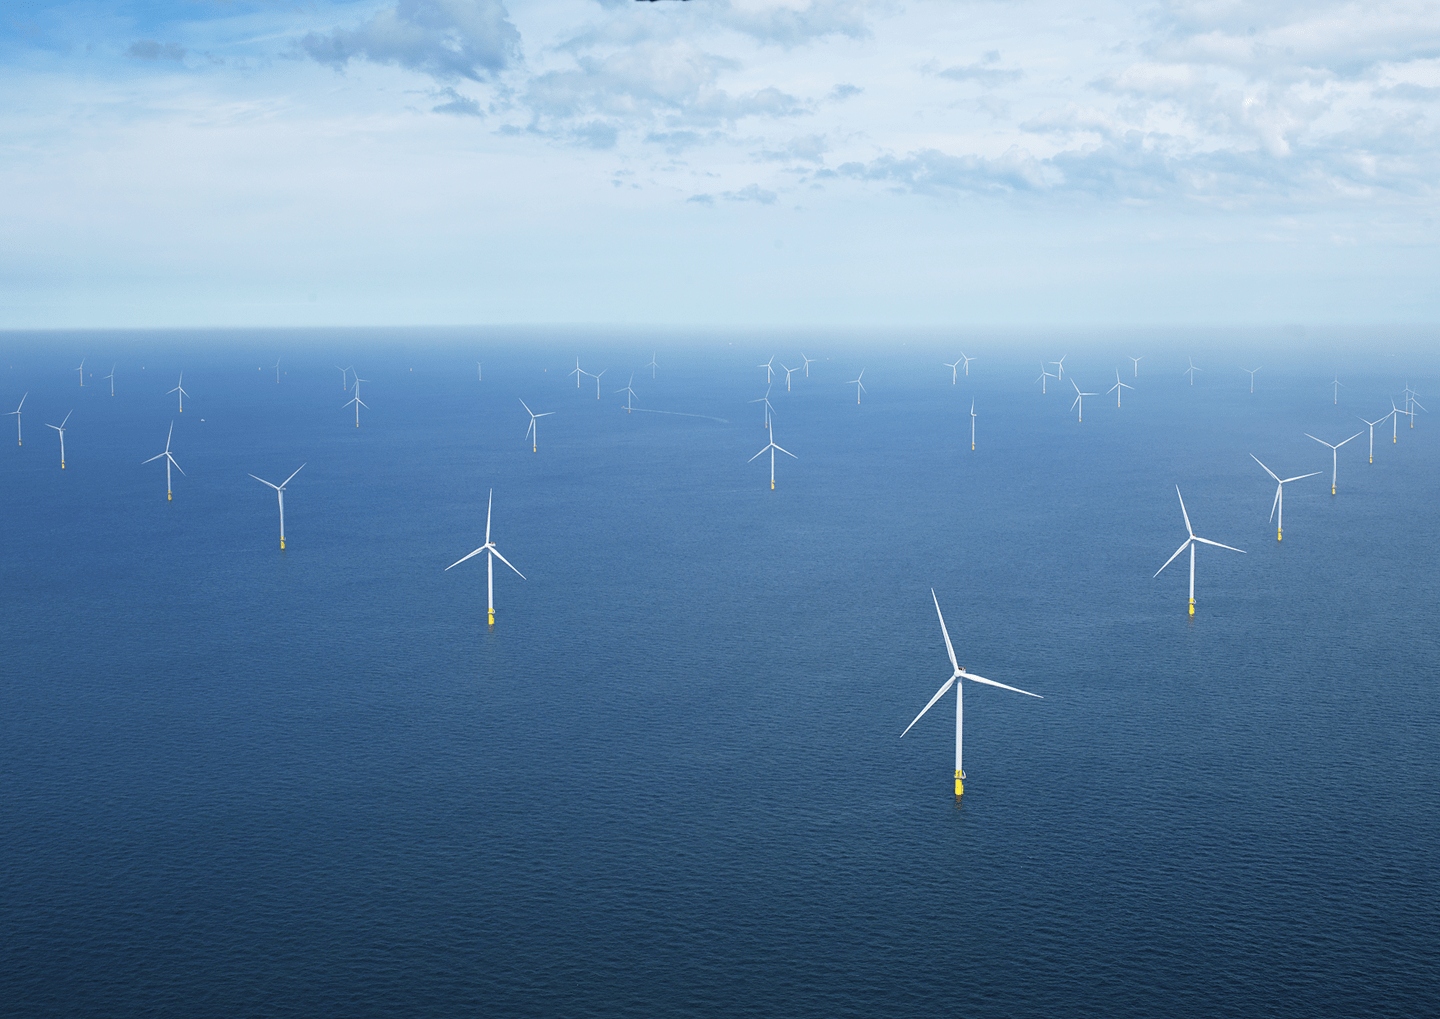 Ørsted has finalized the sale of its interest in the Borssele 1 & 2 offshore wind project in the Netherlands to Norges Bank Investment Management (NBIM).